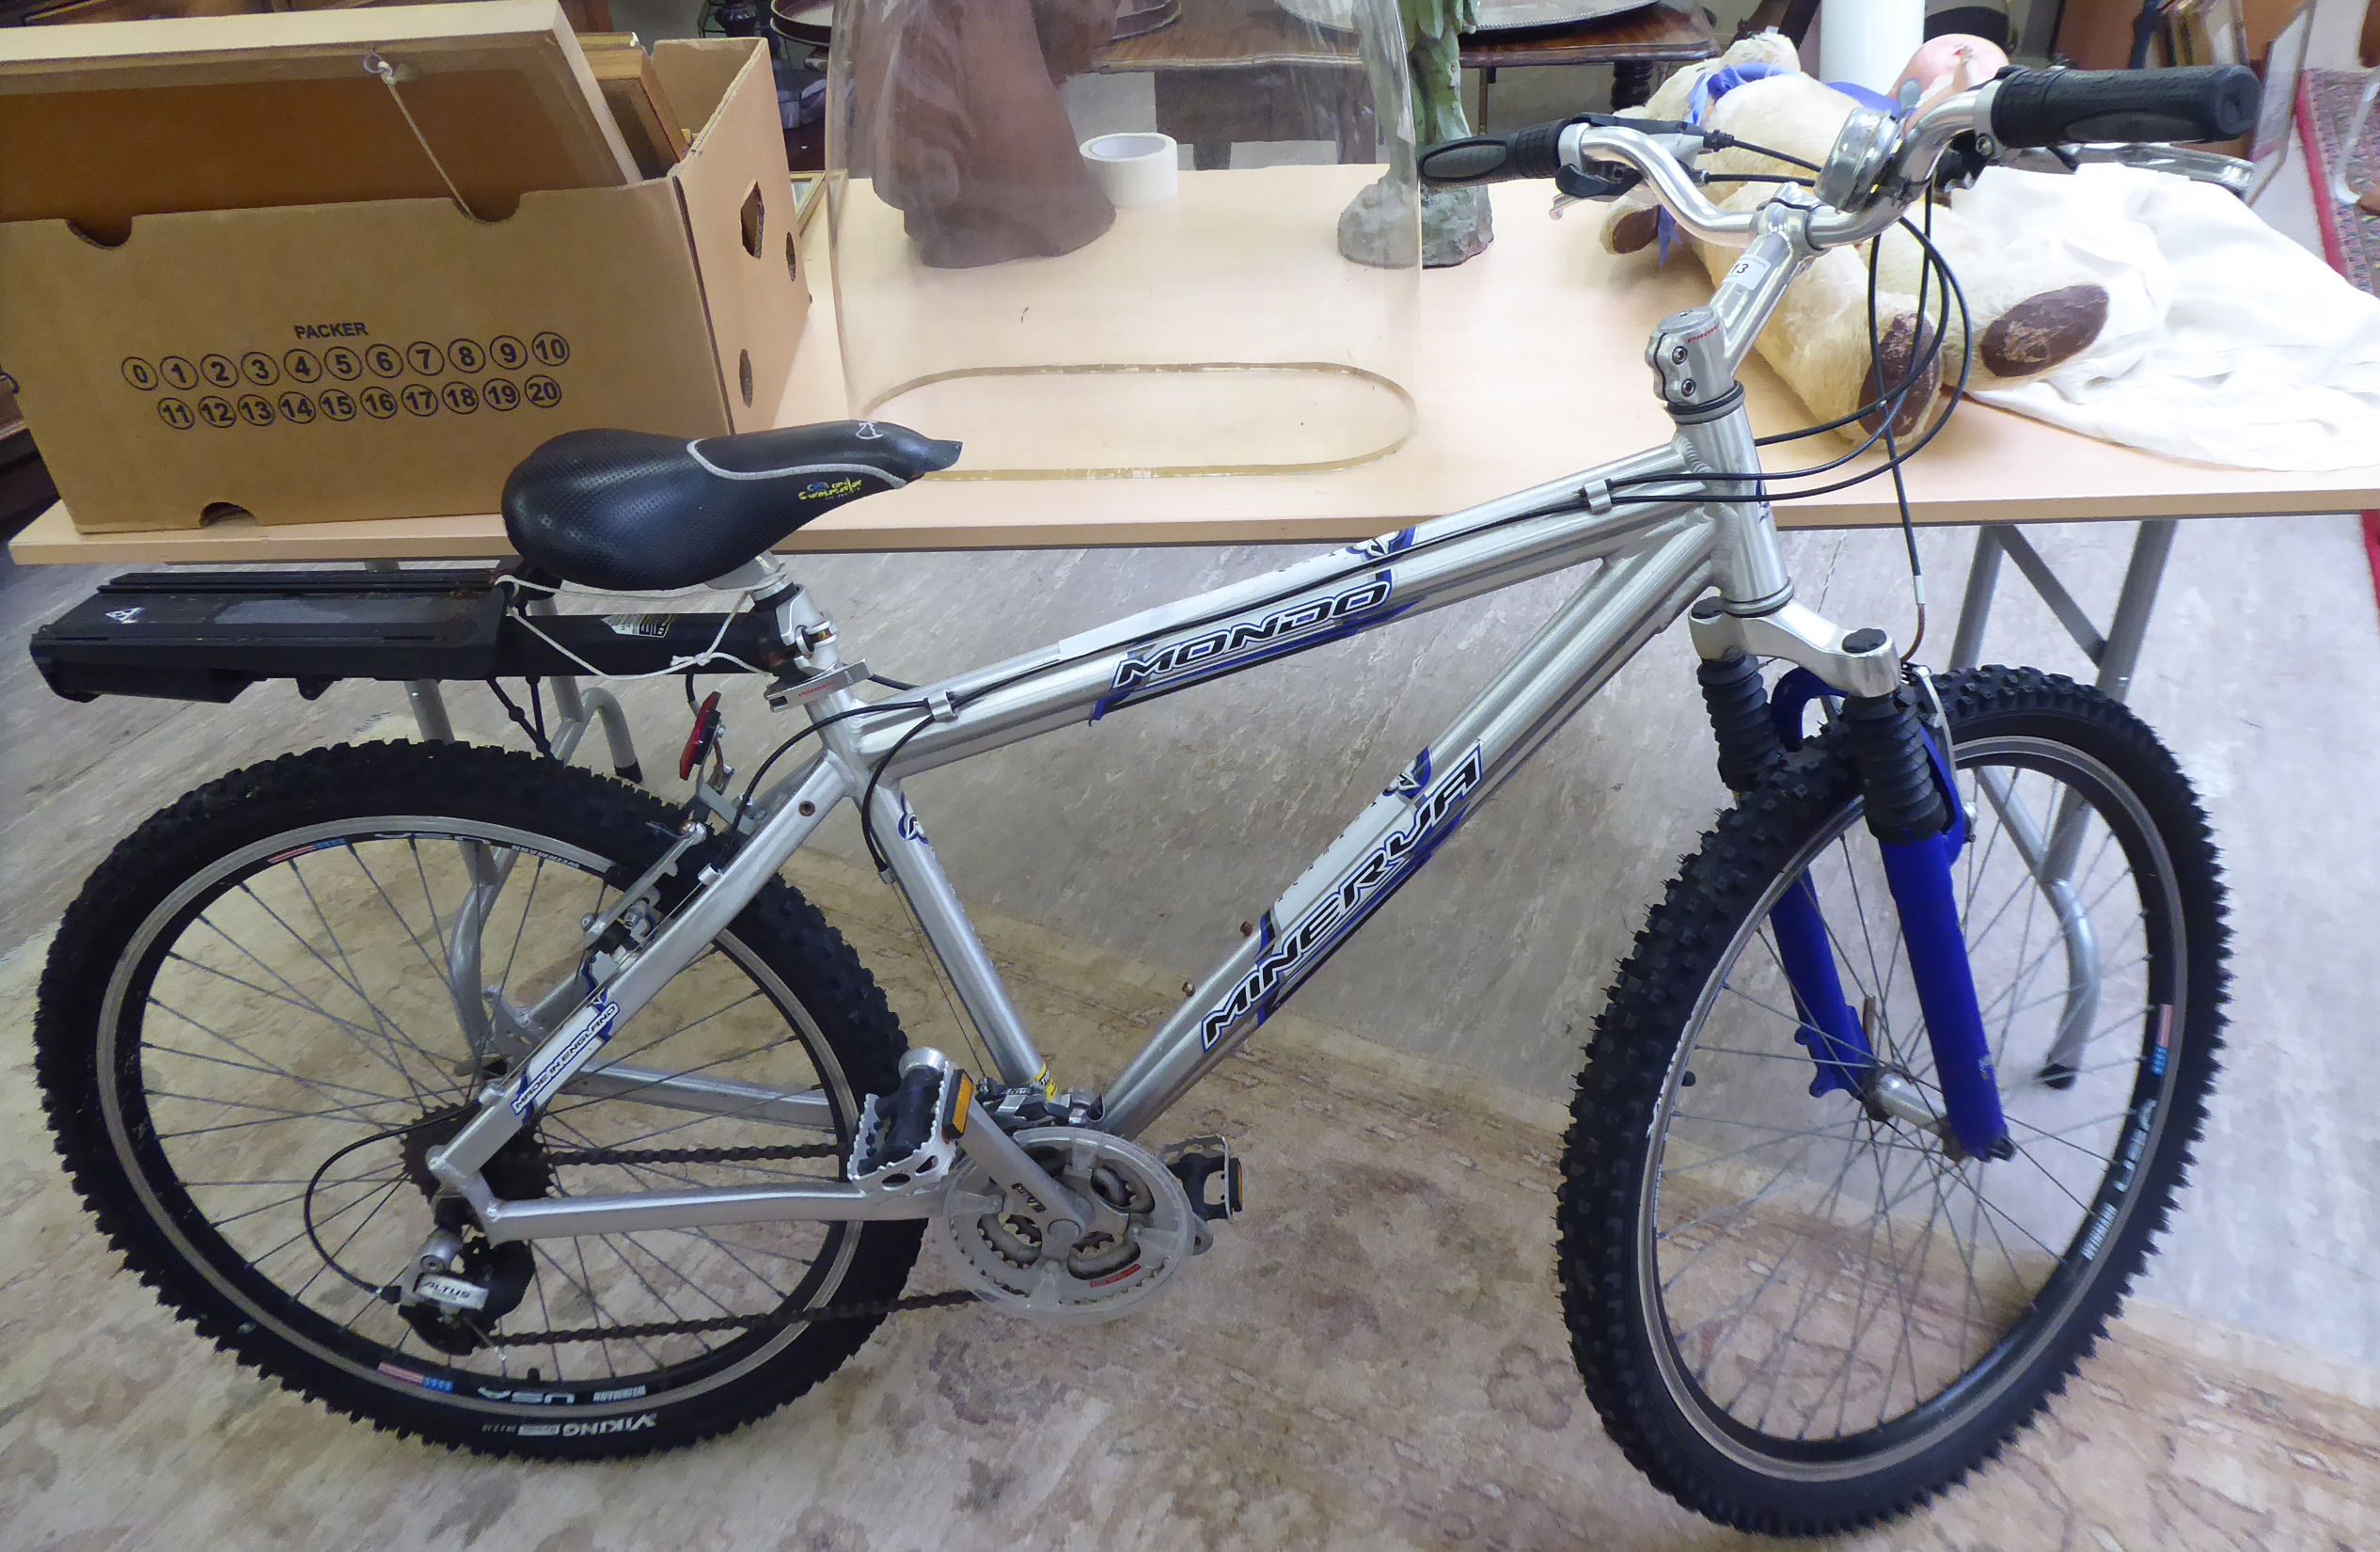 A Mineraw mountain bike with sprung forks,